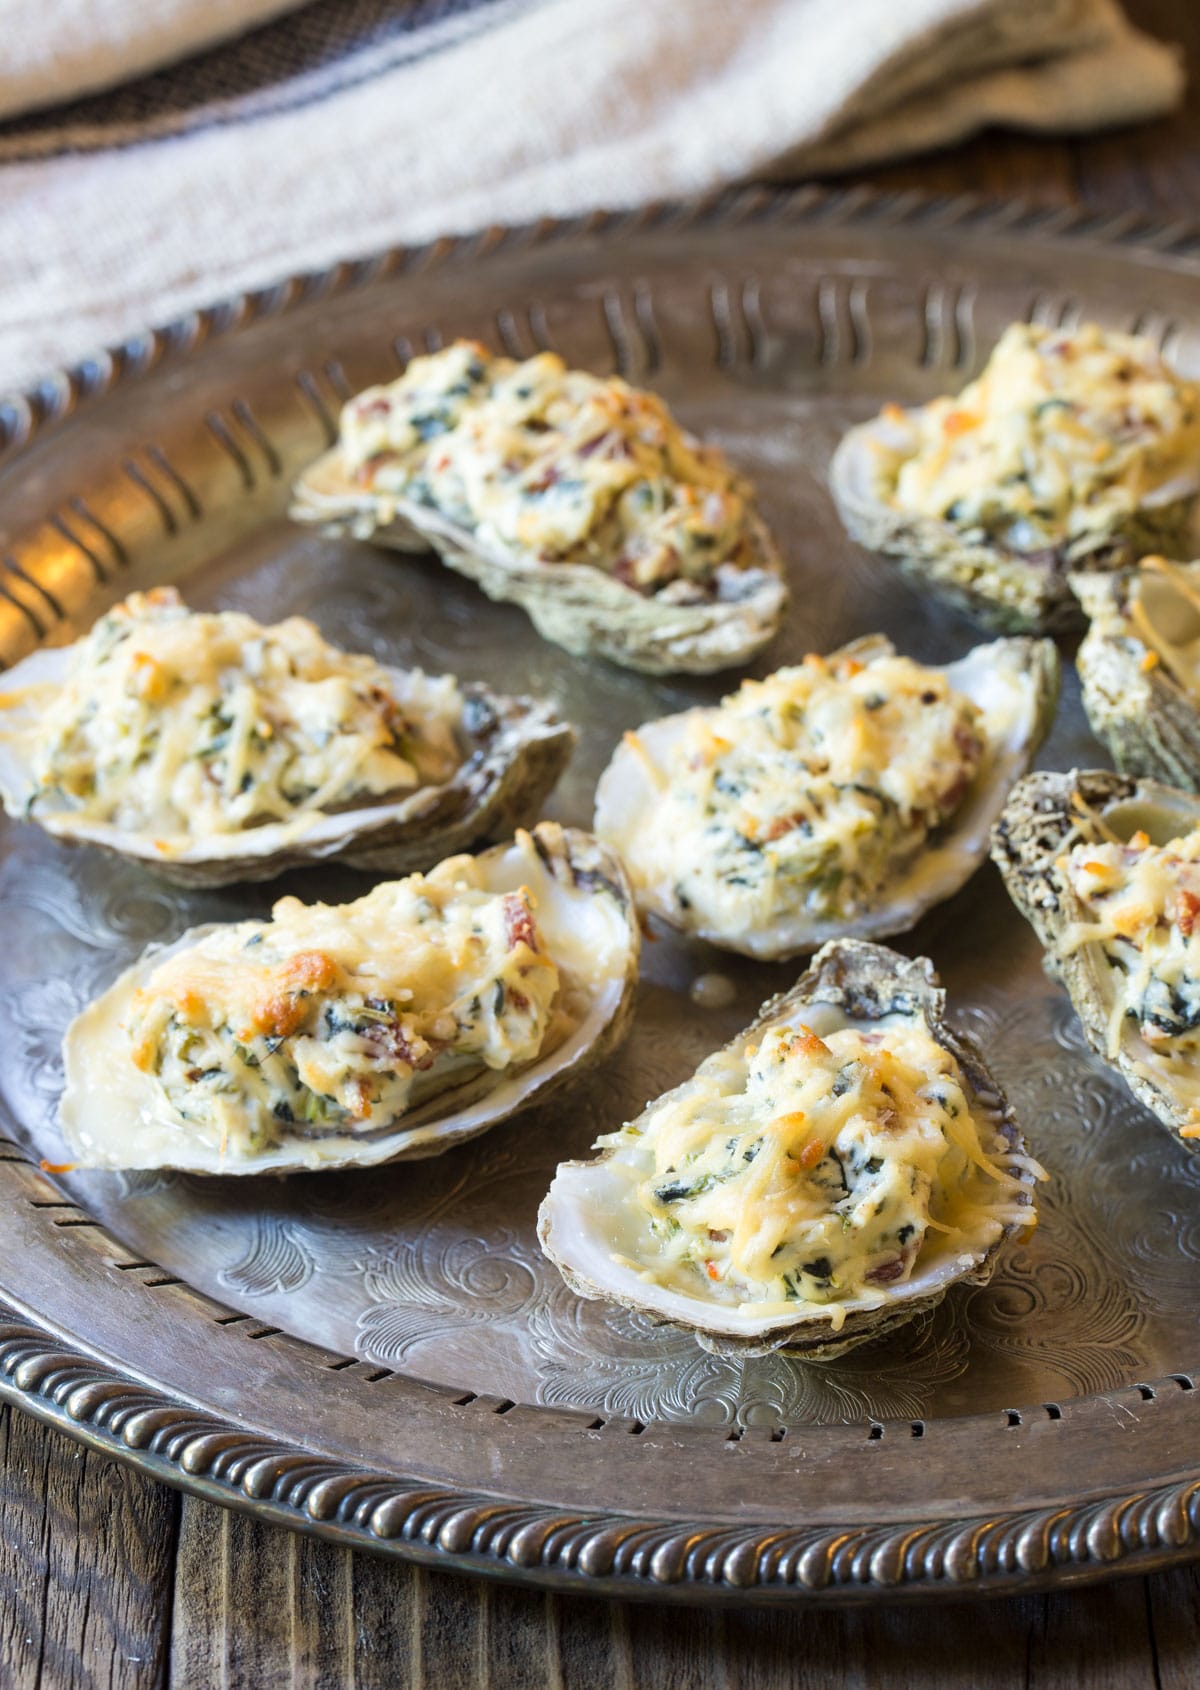 Best Three-Cheese Baked Oysters Recipe (In The Shell!) #ASpicyPerspective #holiday #newyears #christmas